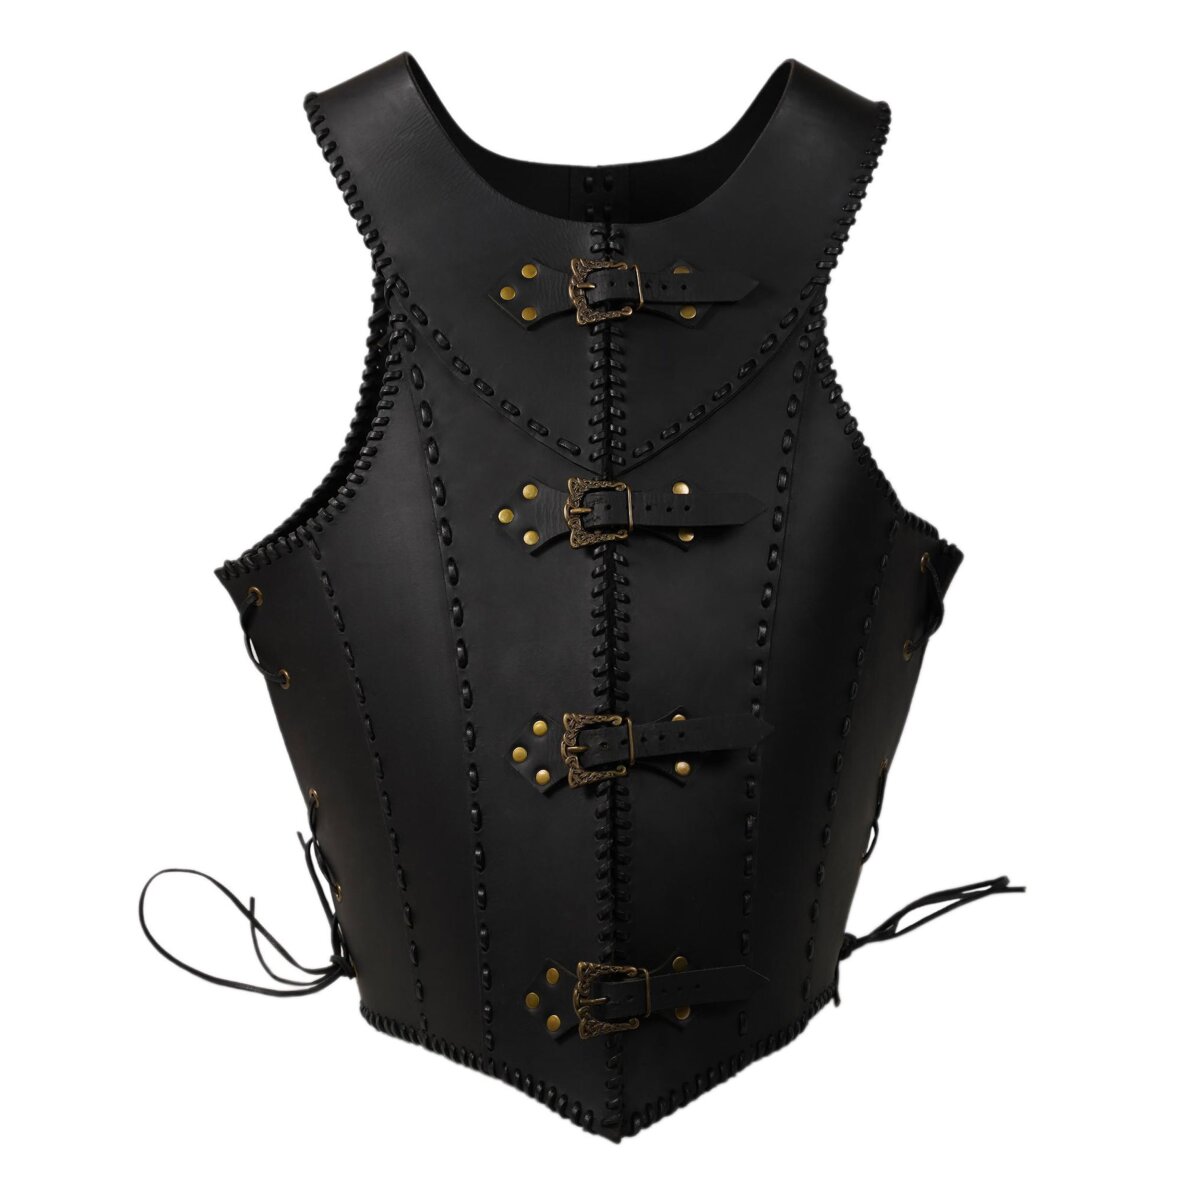 The Lady Warrior Leather Corset